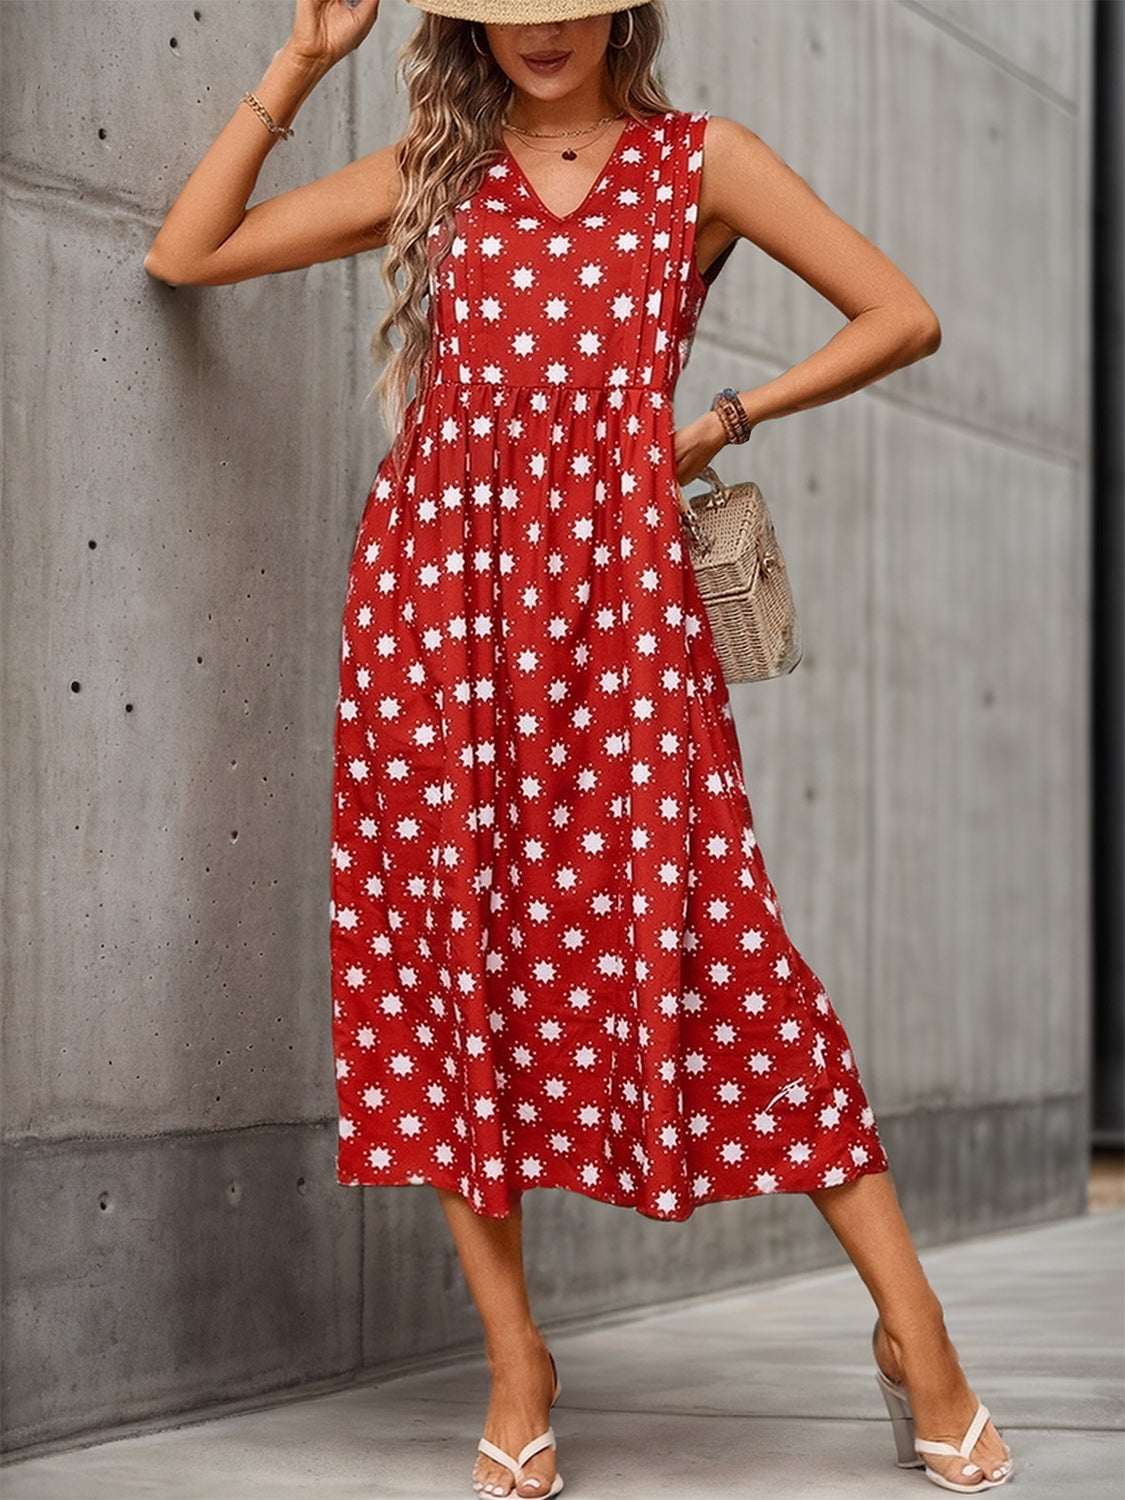 Flowy red dress featuring a daisy print and V-neckline.